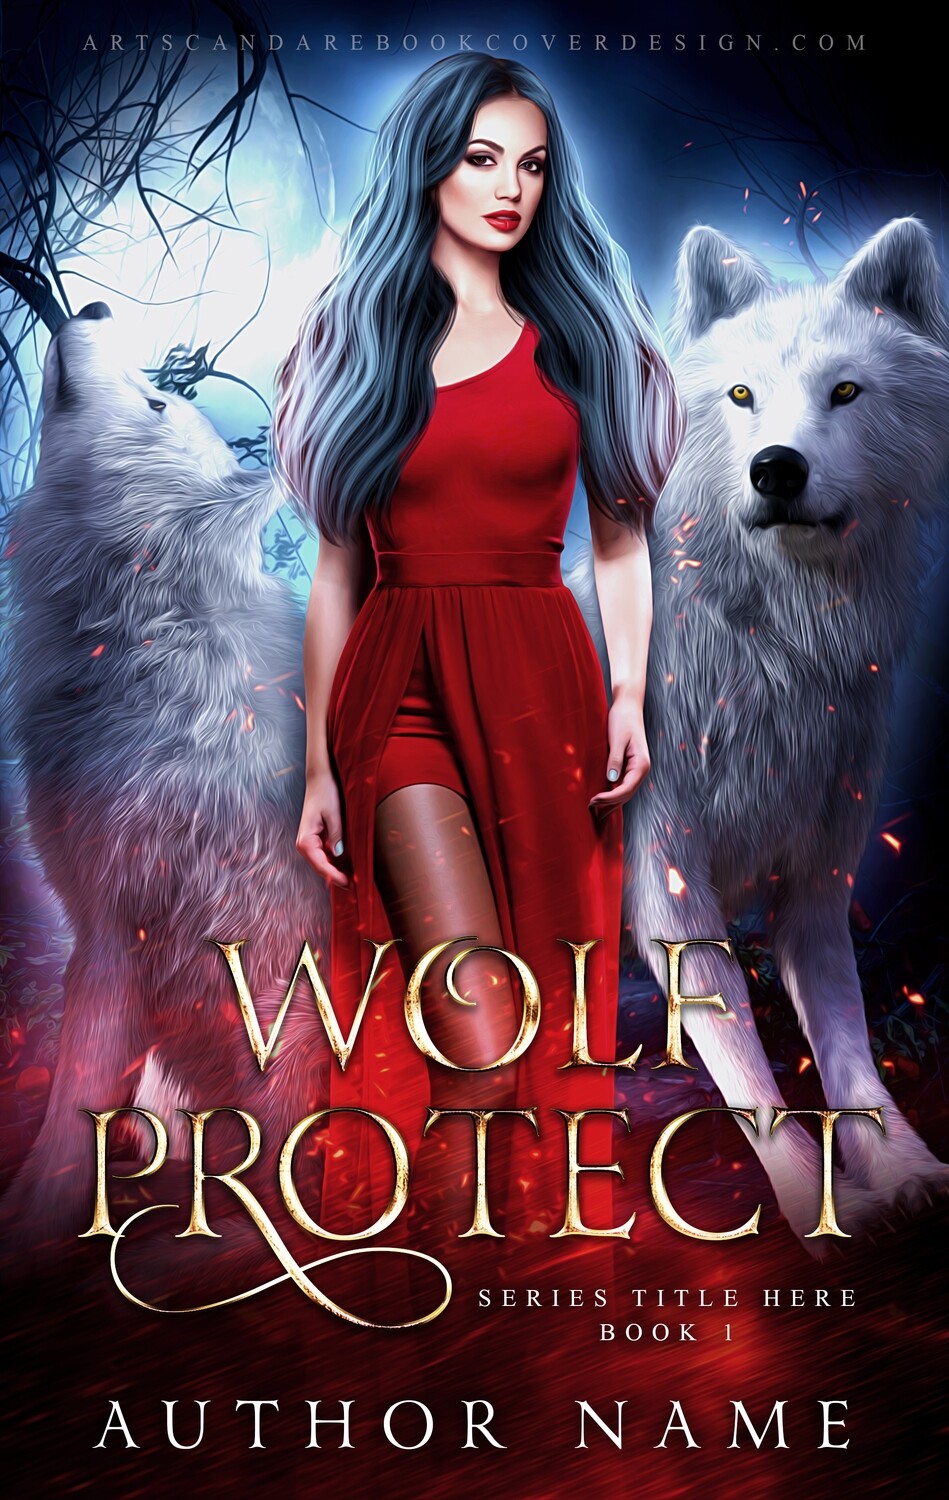 WOLF PROTECT